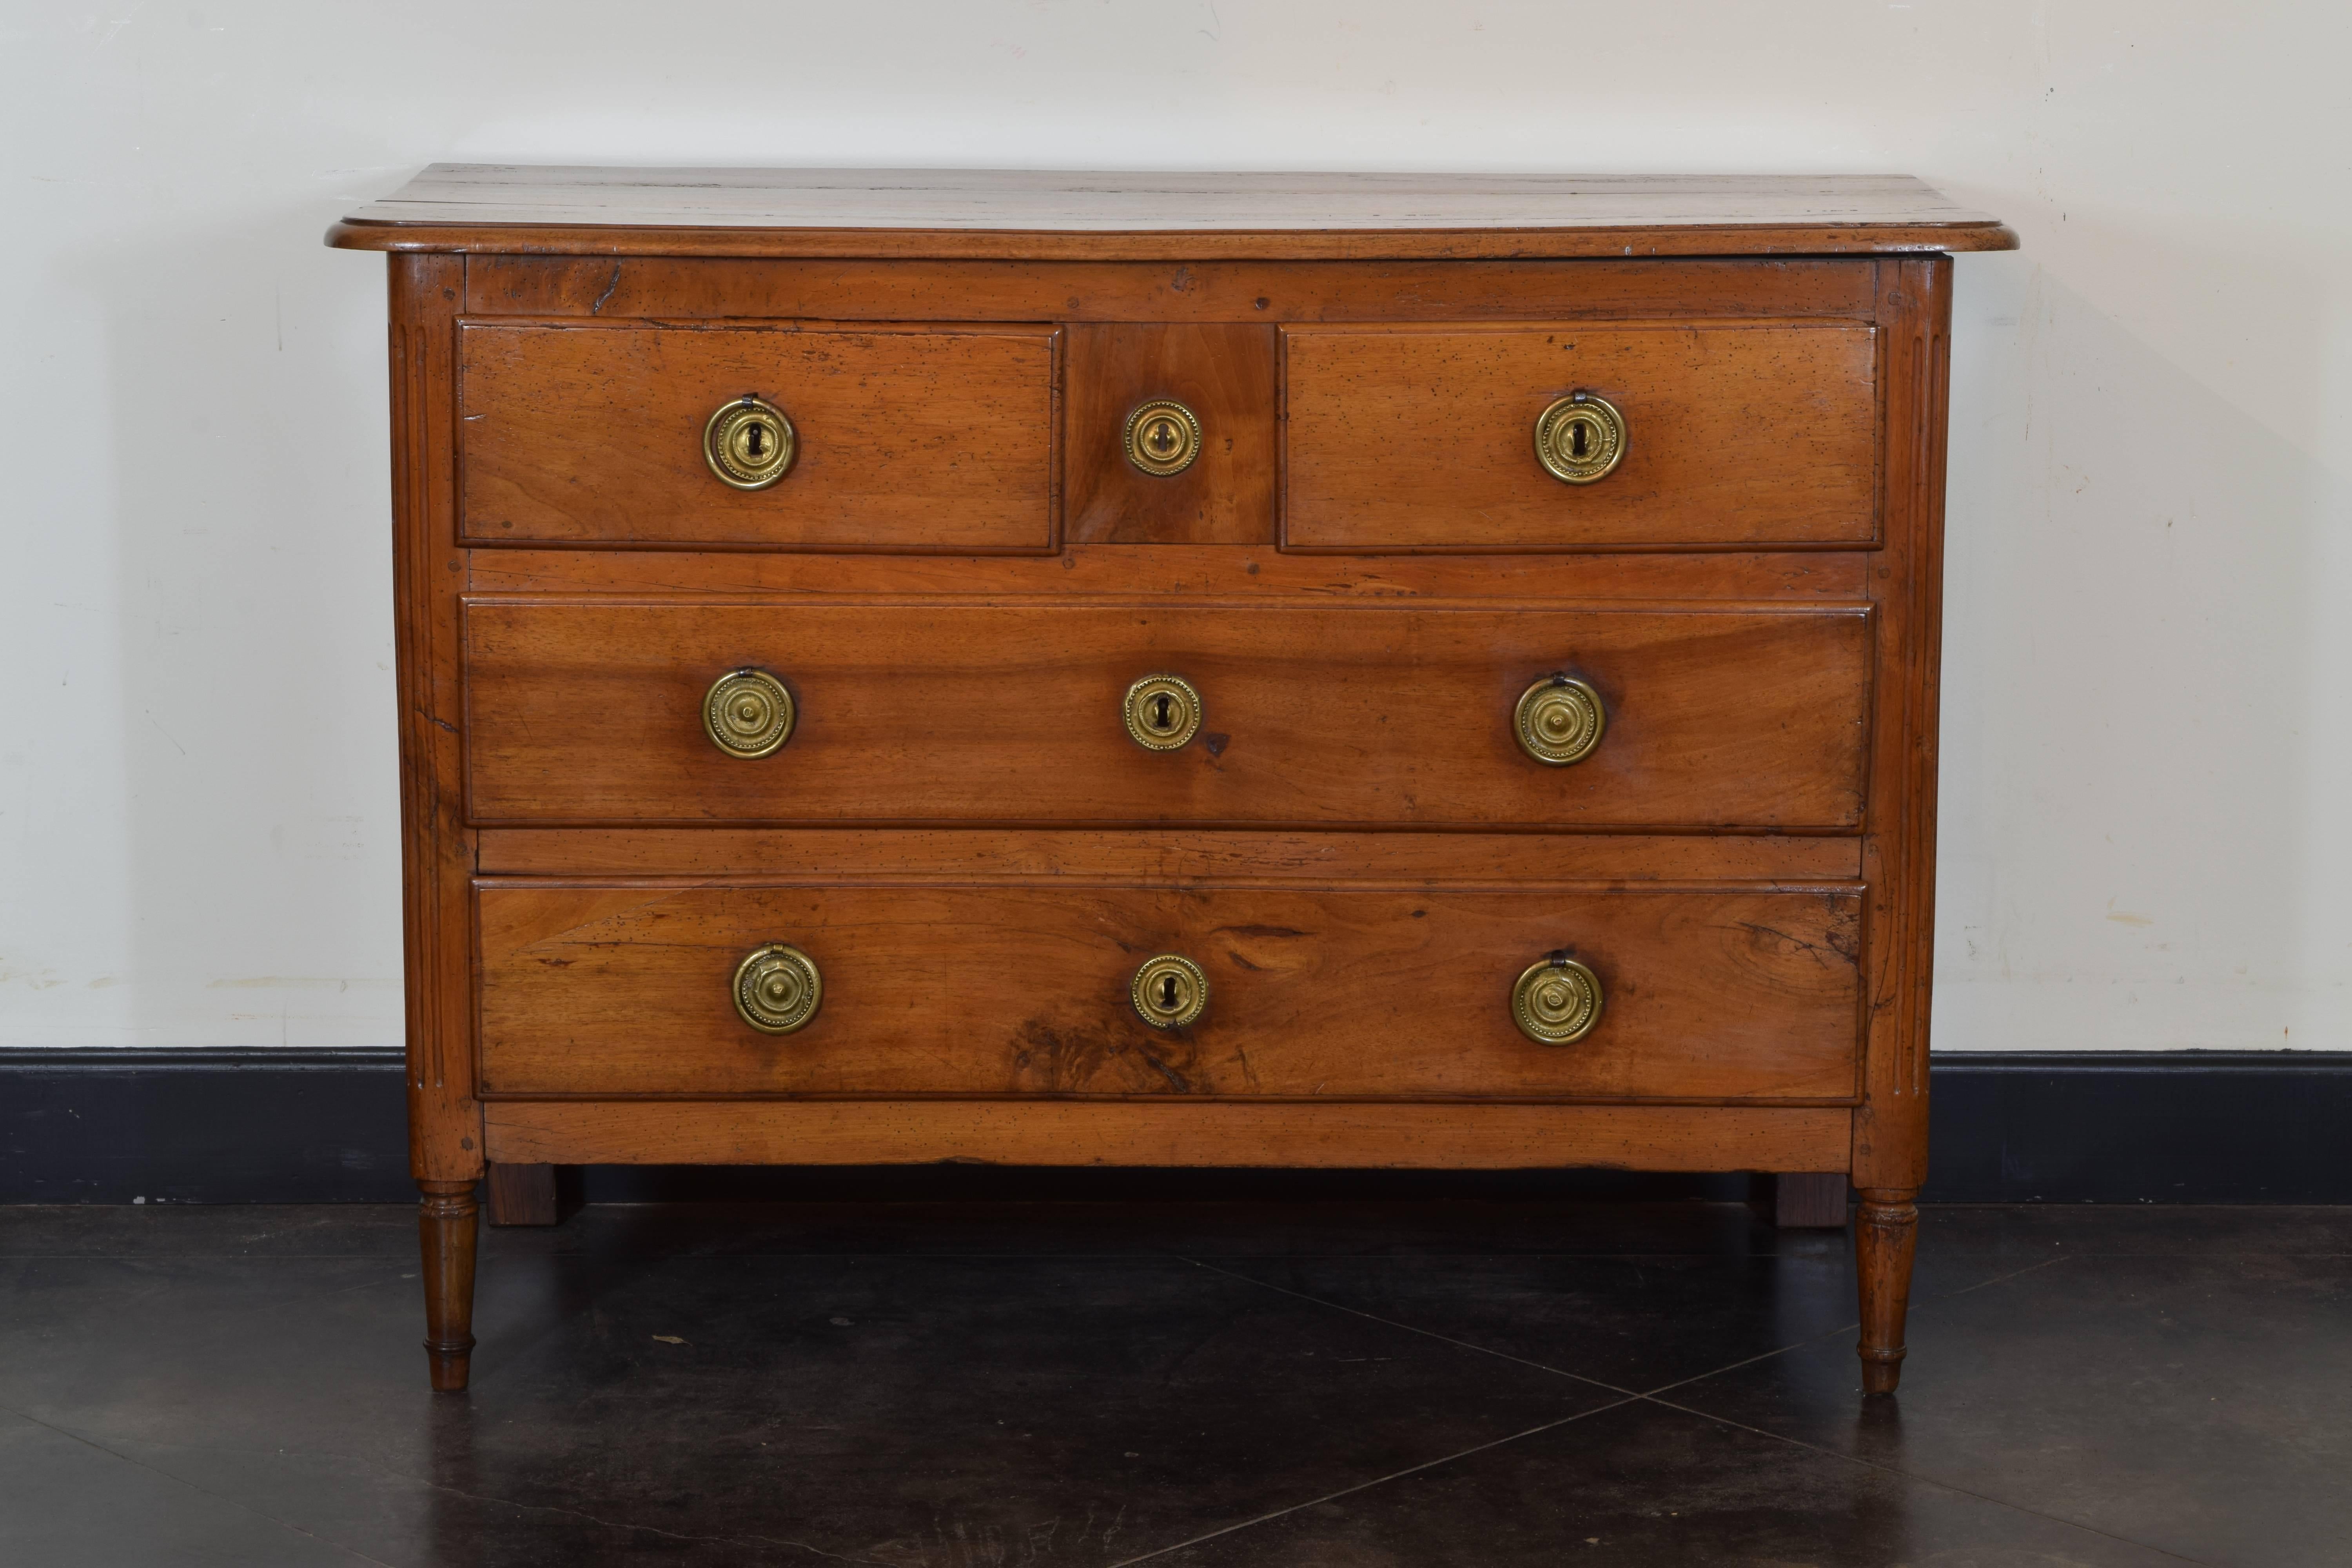 Having a rectangular top with rounded front corners and a molded edge, the case housing two small drawers over two larger drawers and retaining original brass pulls and locks, the front with fluted corner detail and raised on round tapering front